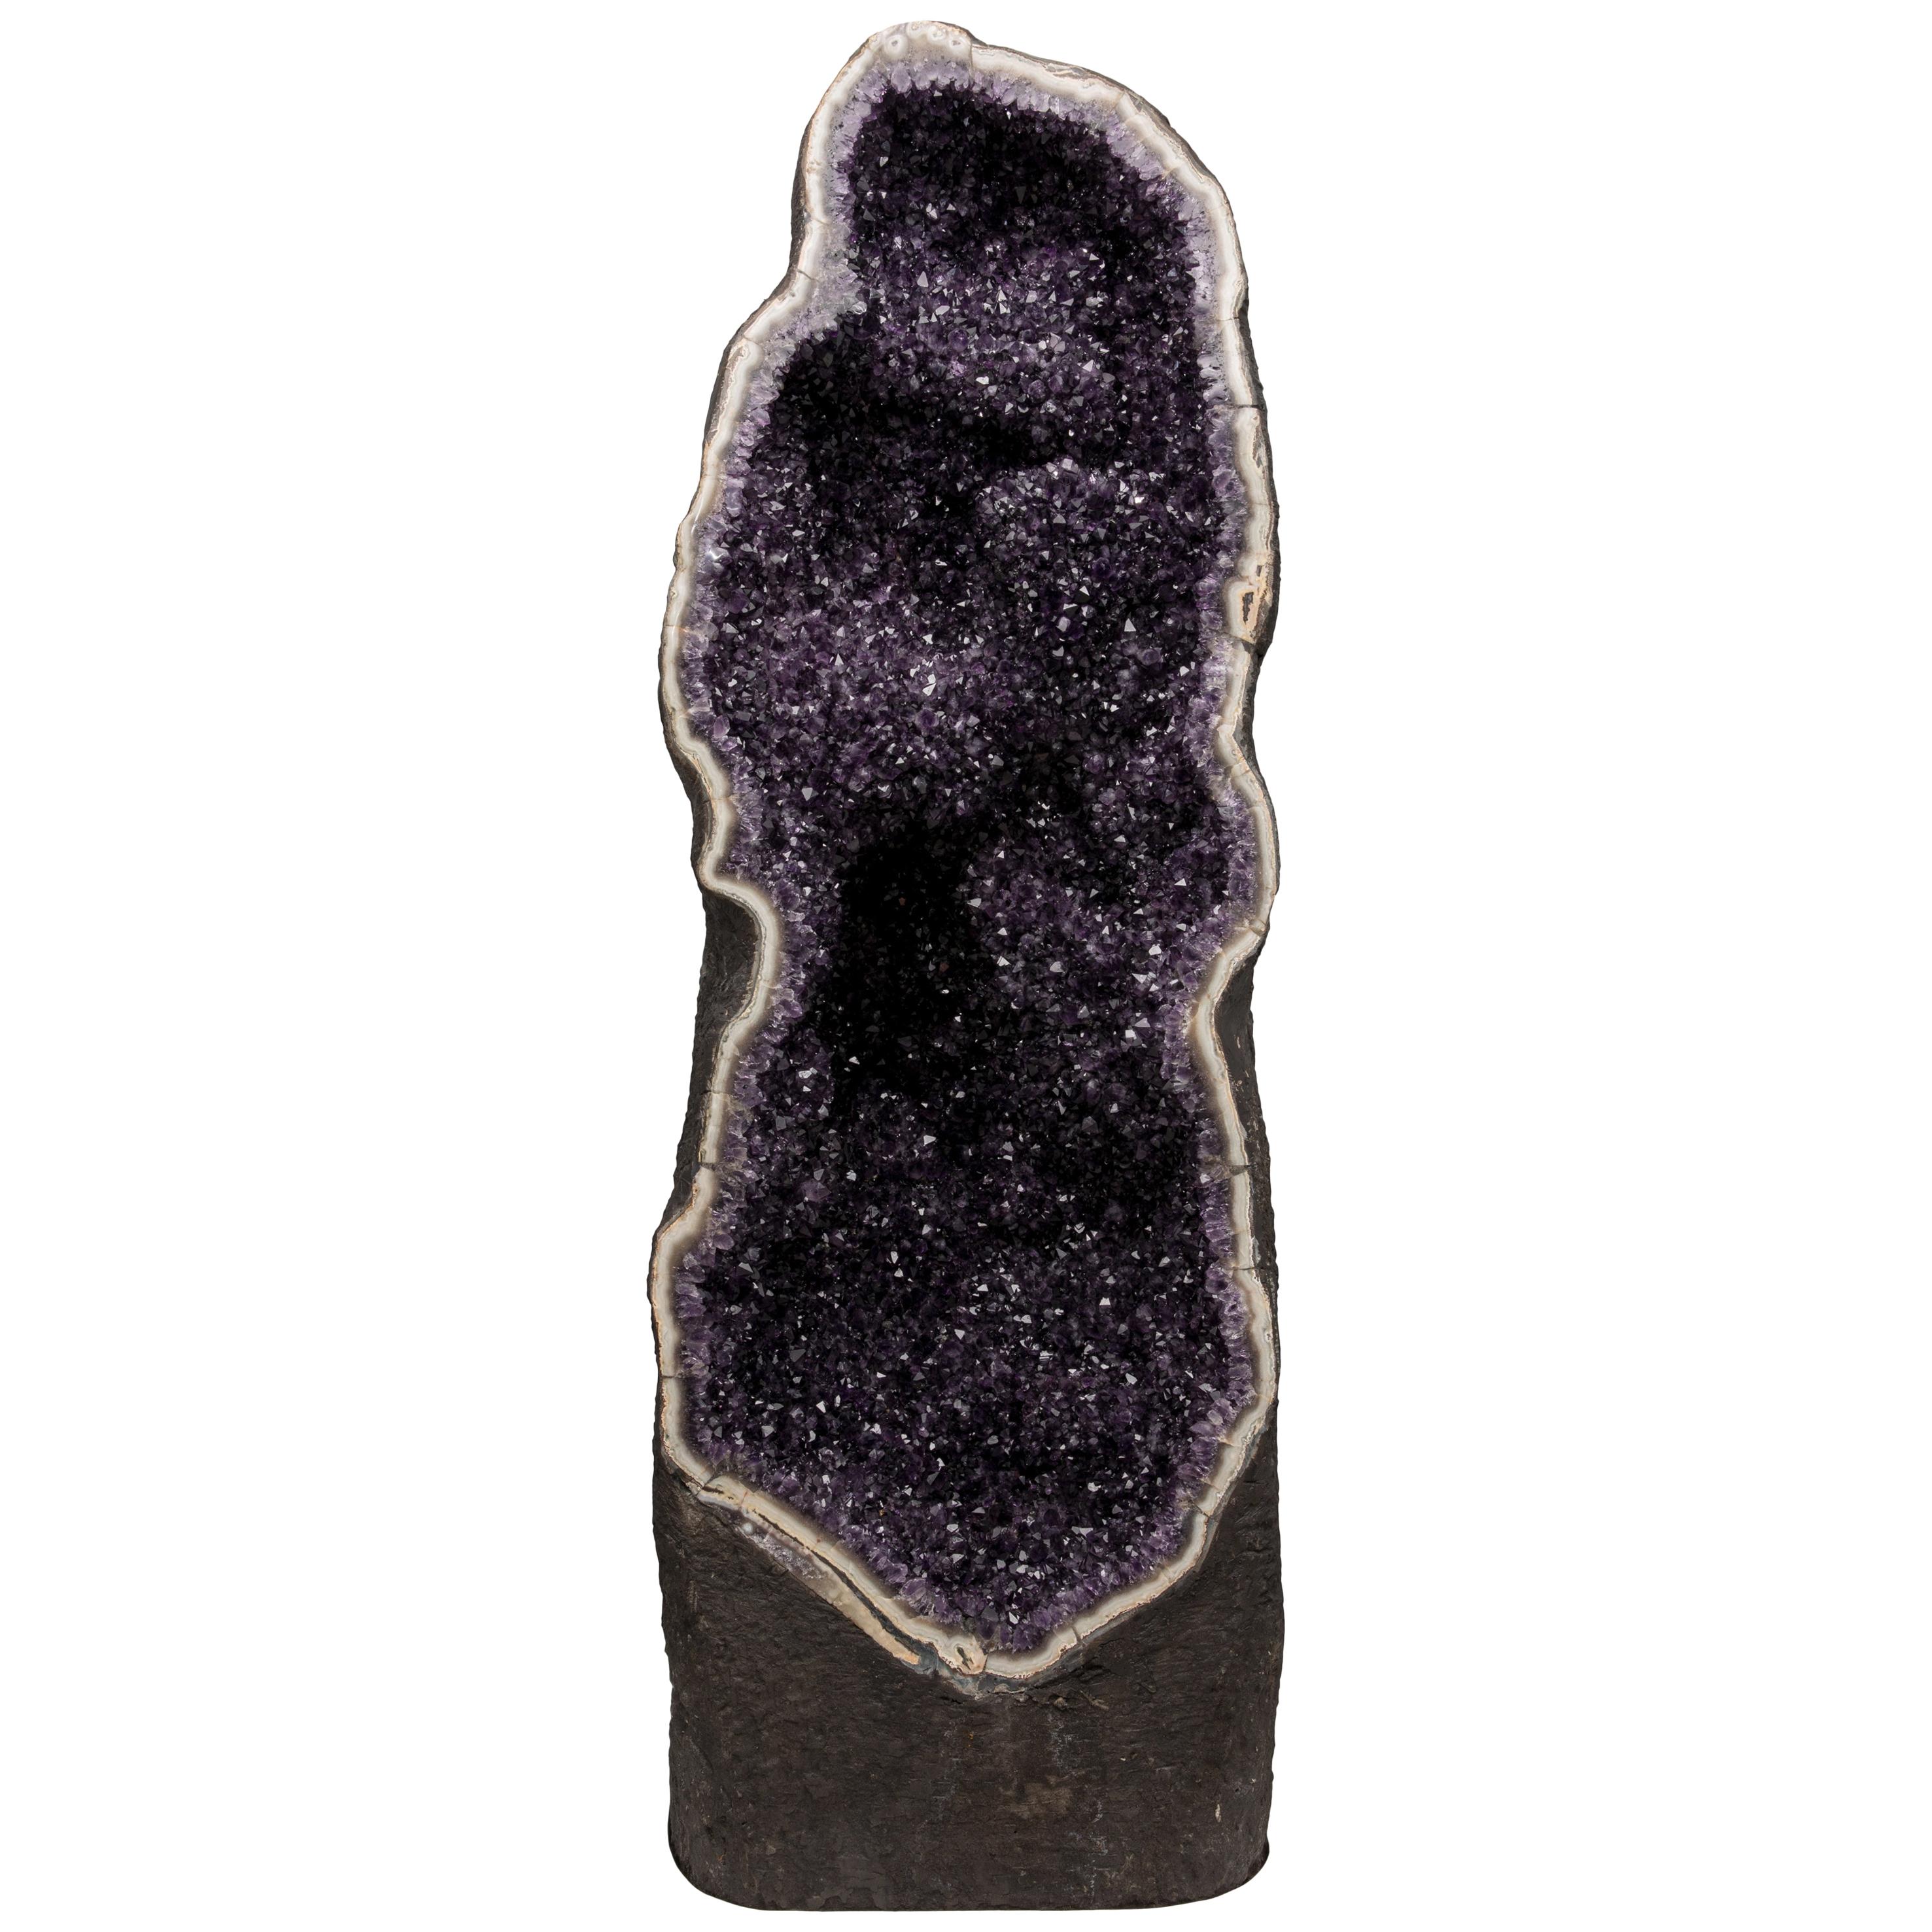 Incredible Deep Purple Amethyst Tower - Complete Half Geode with Agate border